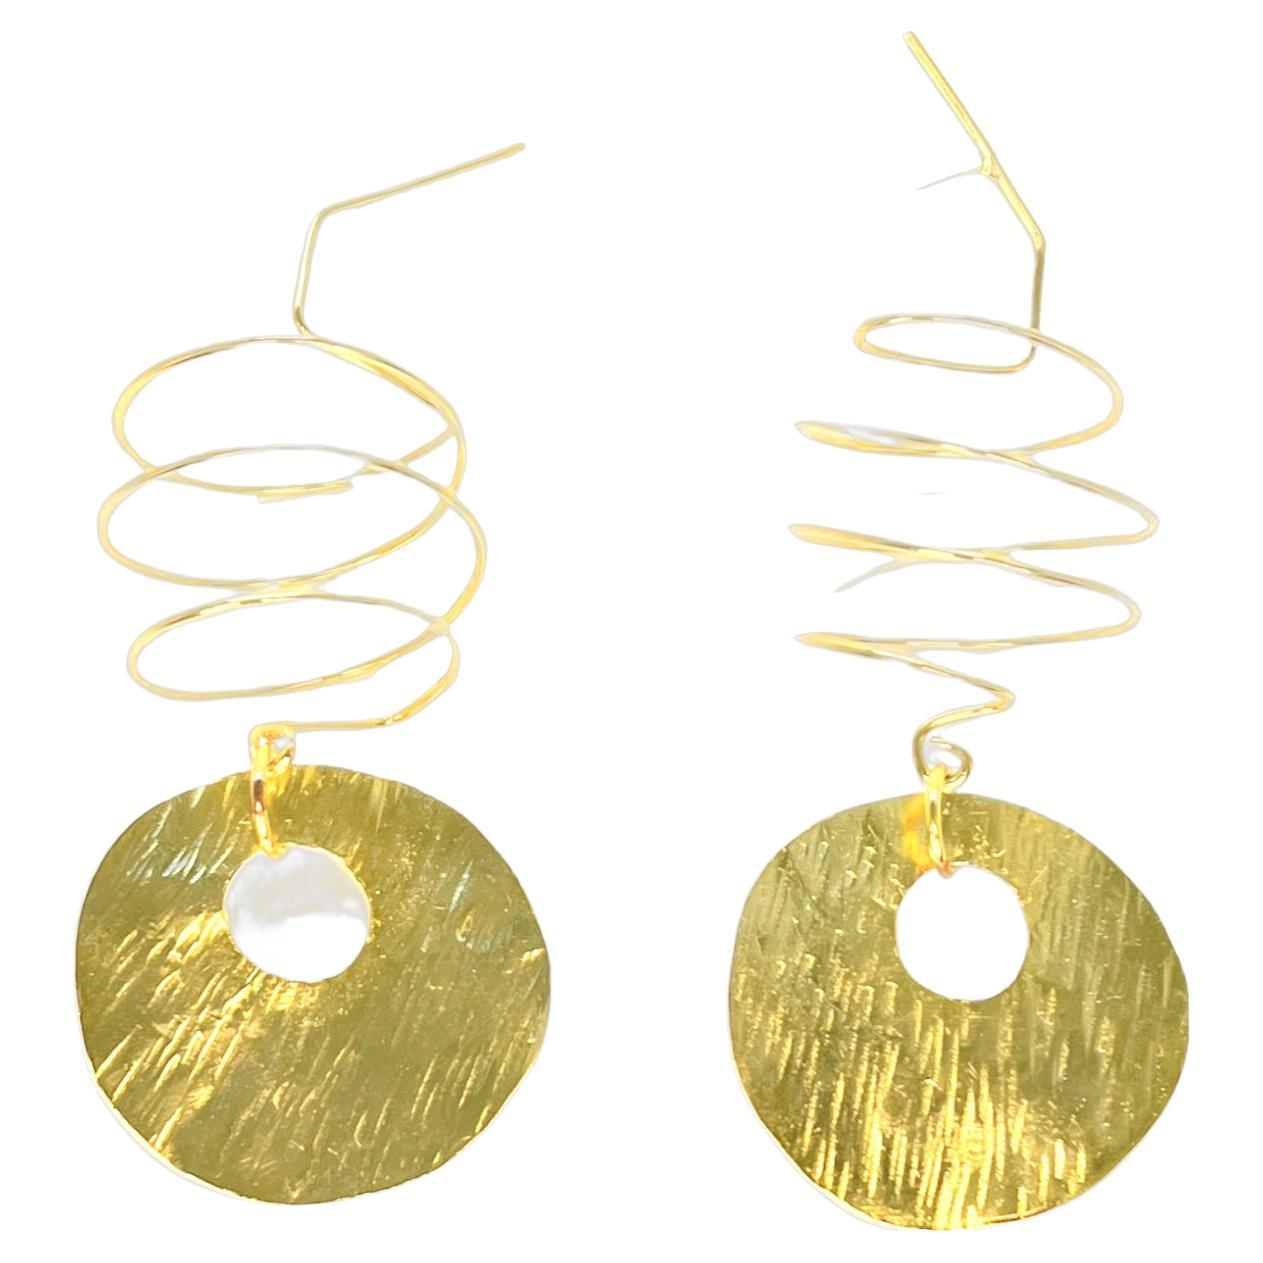 KHRYSTY - 14k Gold Plated Unique Contemporary Earrings - off-the-runway